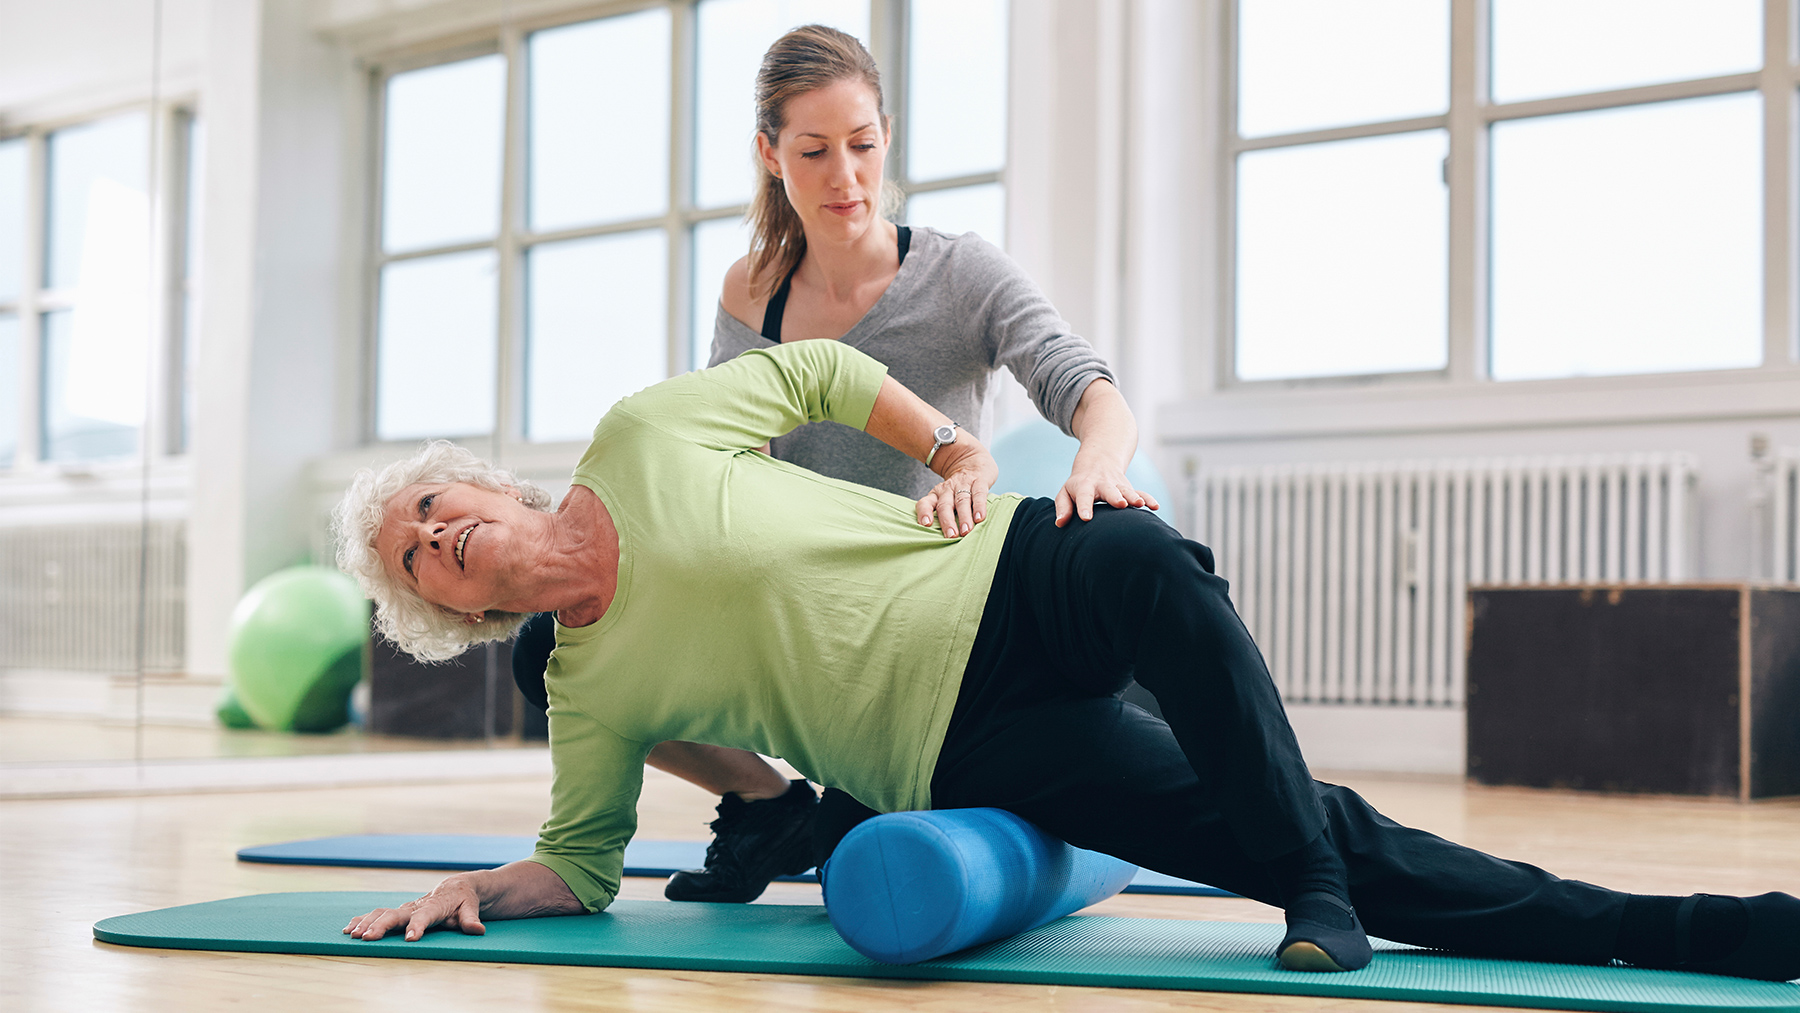 10 Professional Hacks for Physical Therapists